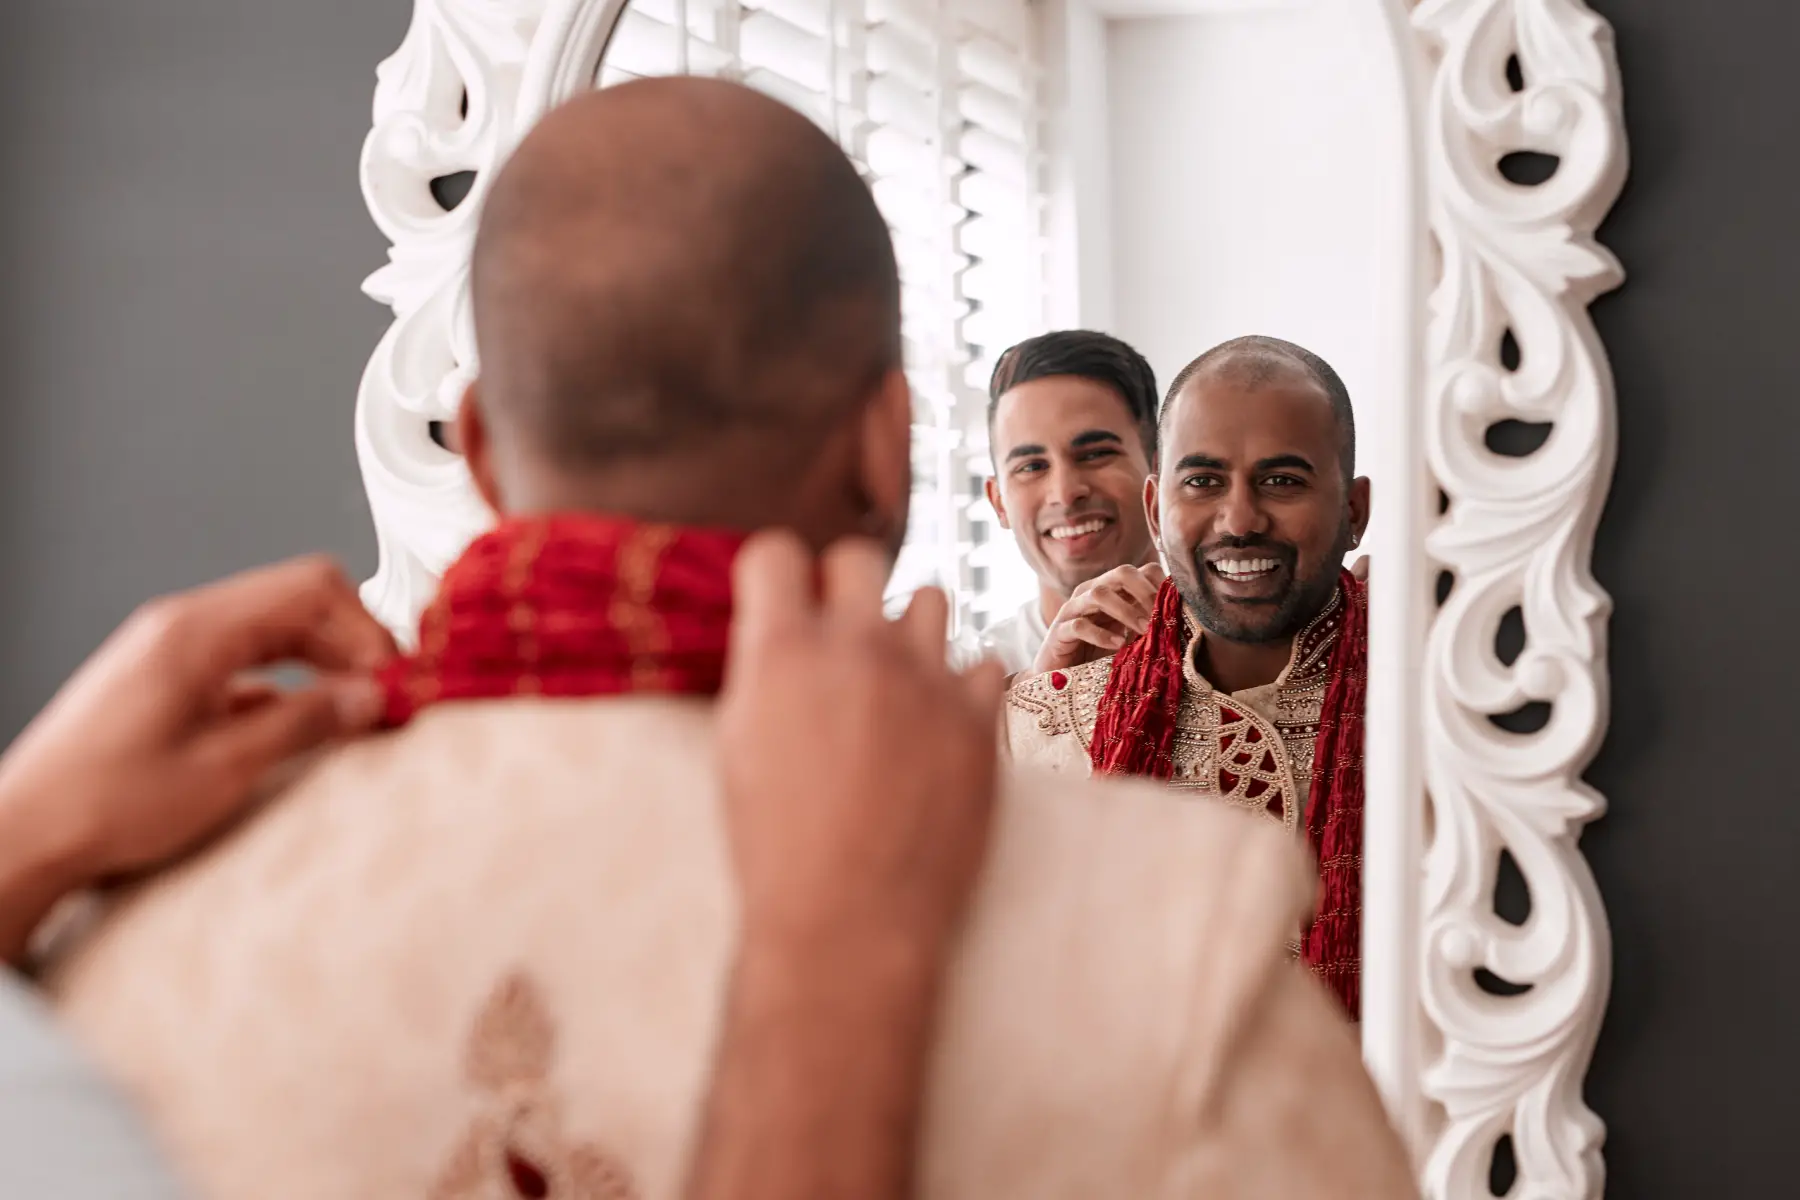 Muslim groom looking into mirror while friend helps him to get ready